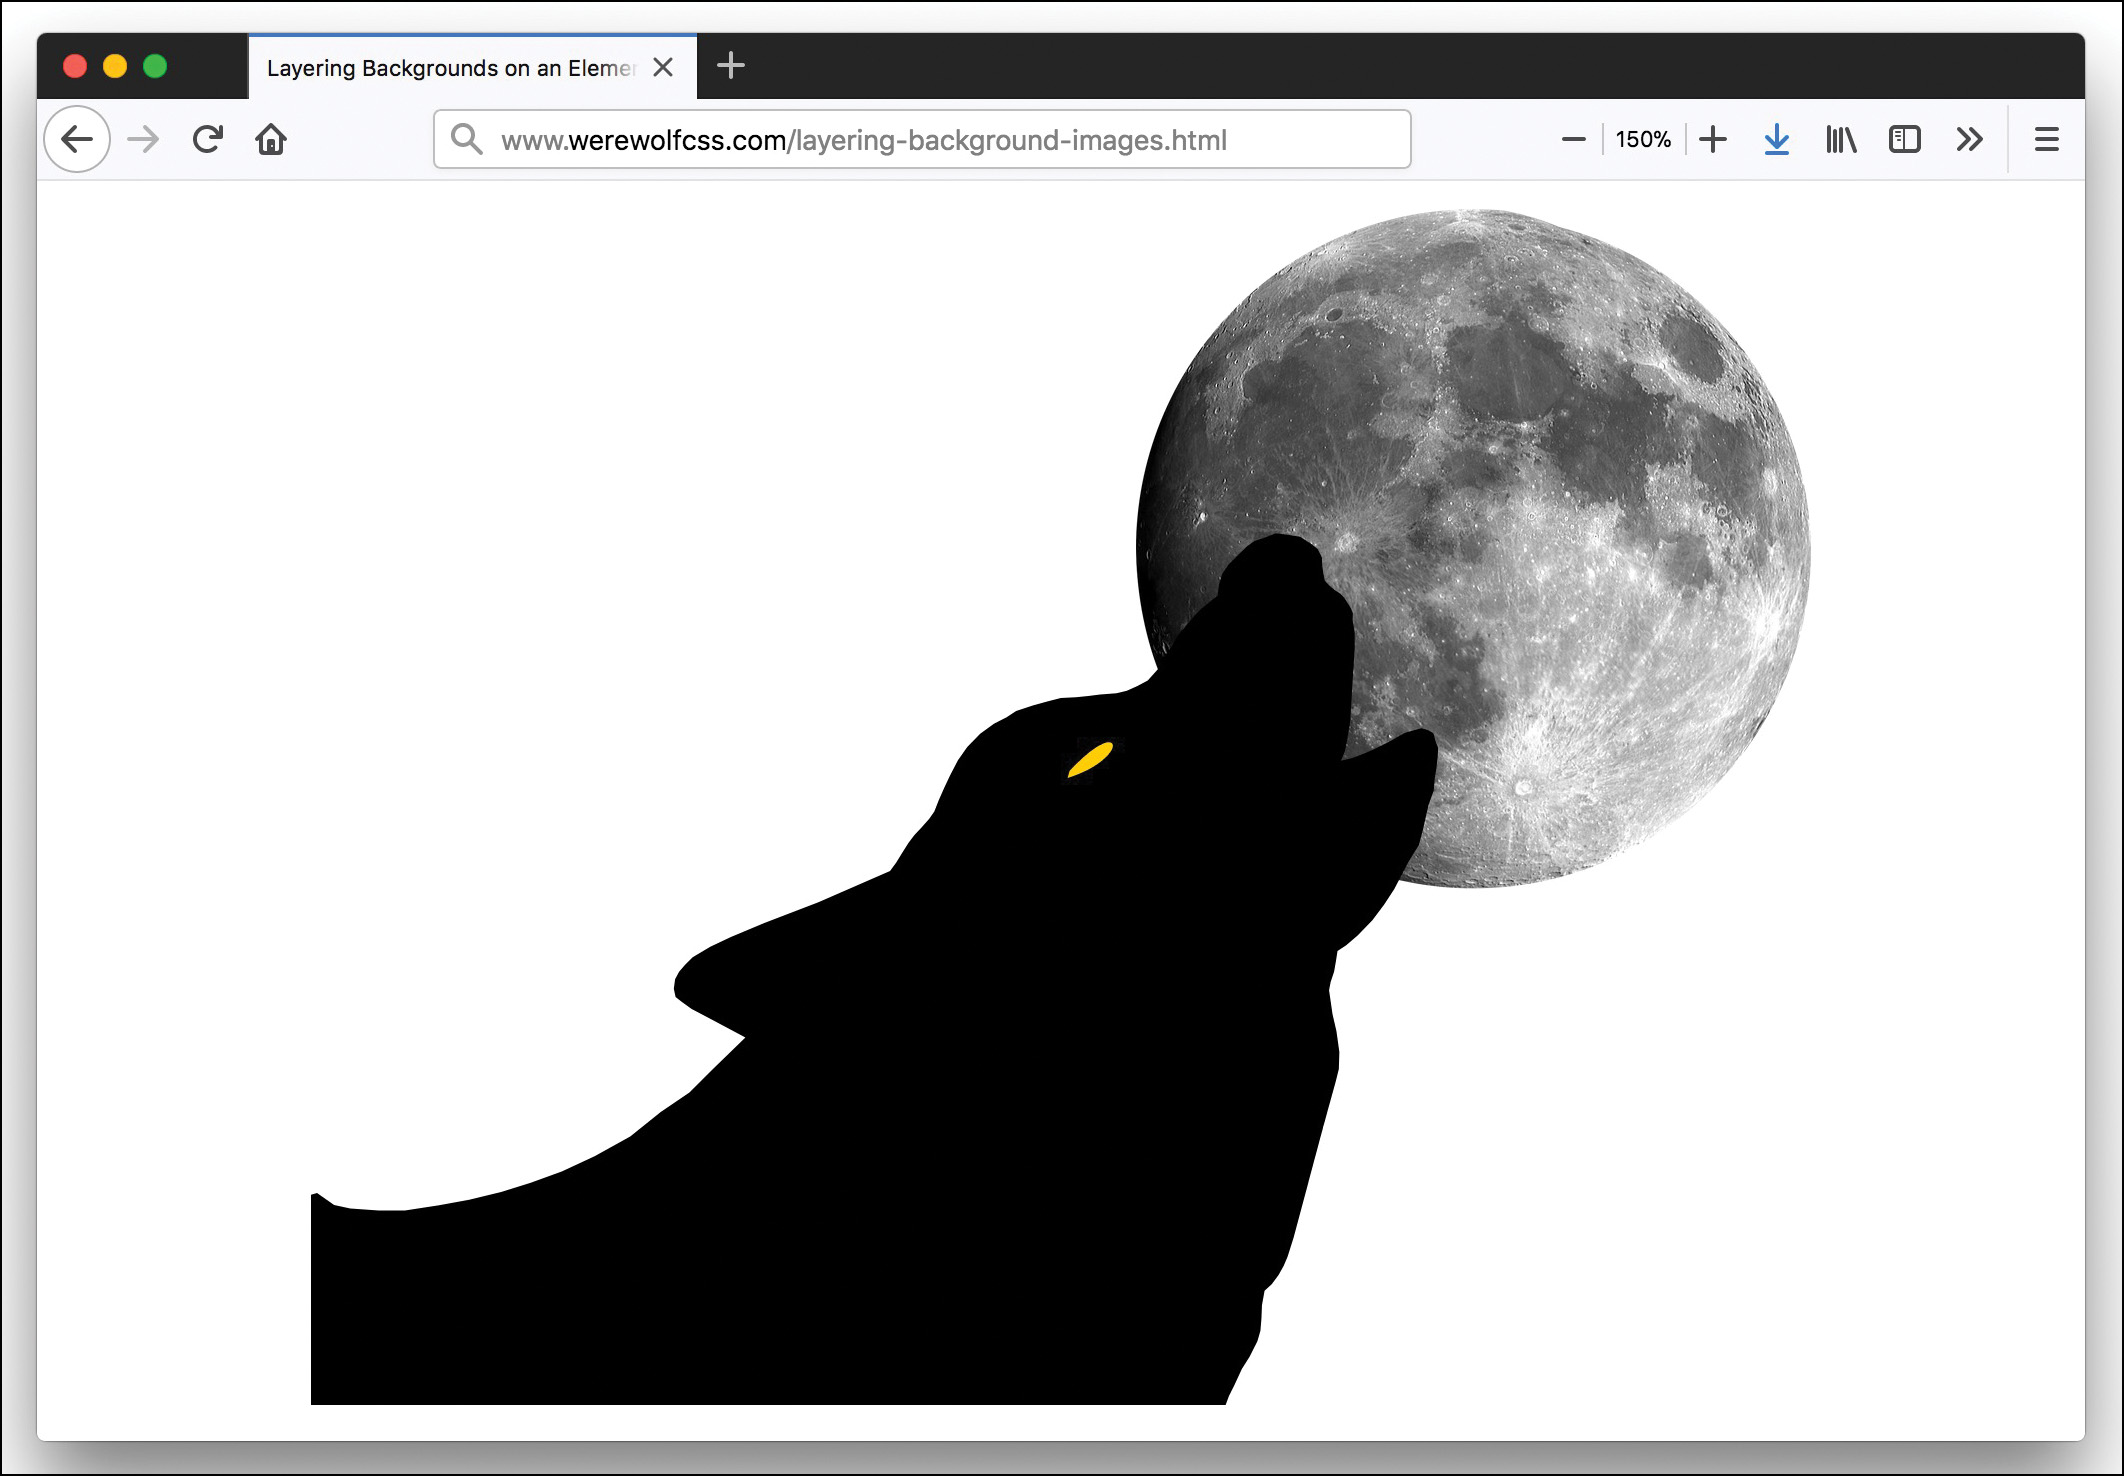 A screenshot of a browser window shows the "layering background images.html" page of www.werewolfcss.com. An image of a howling wolf is seen at the foreground and the moon backdrops this. 